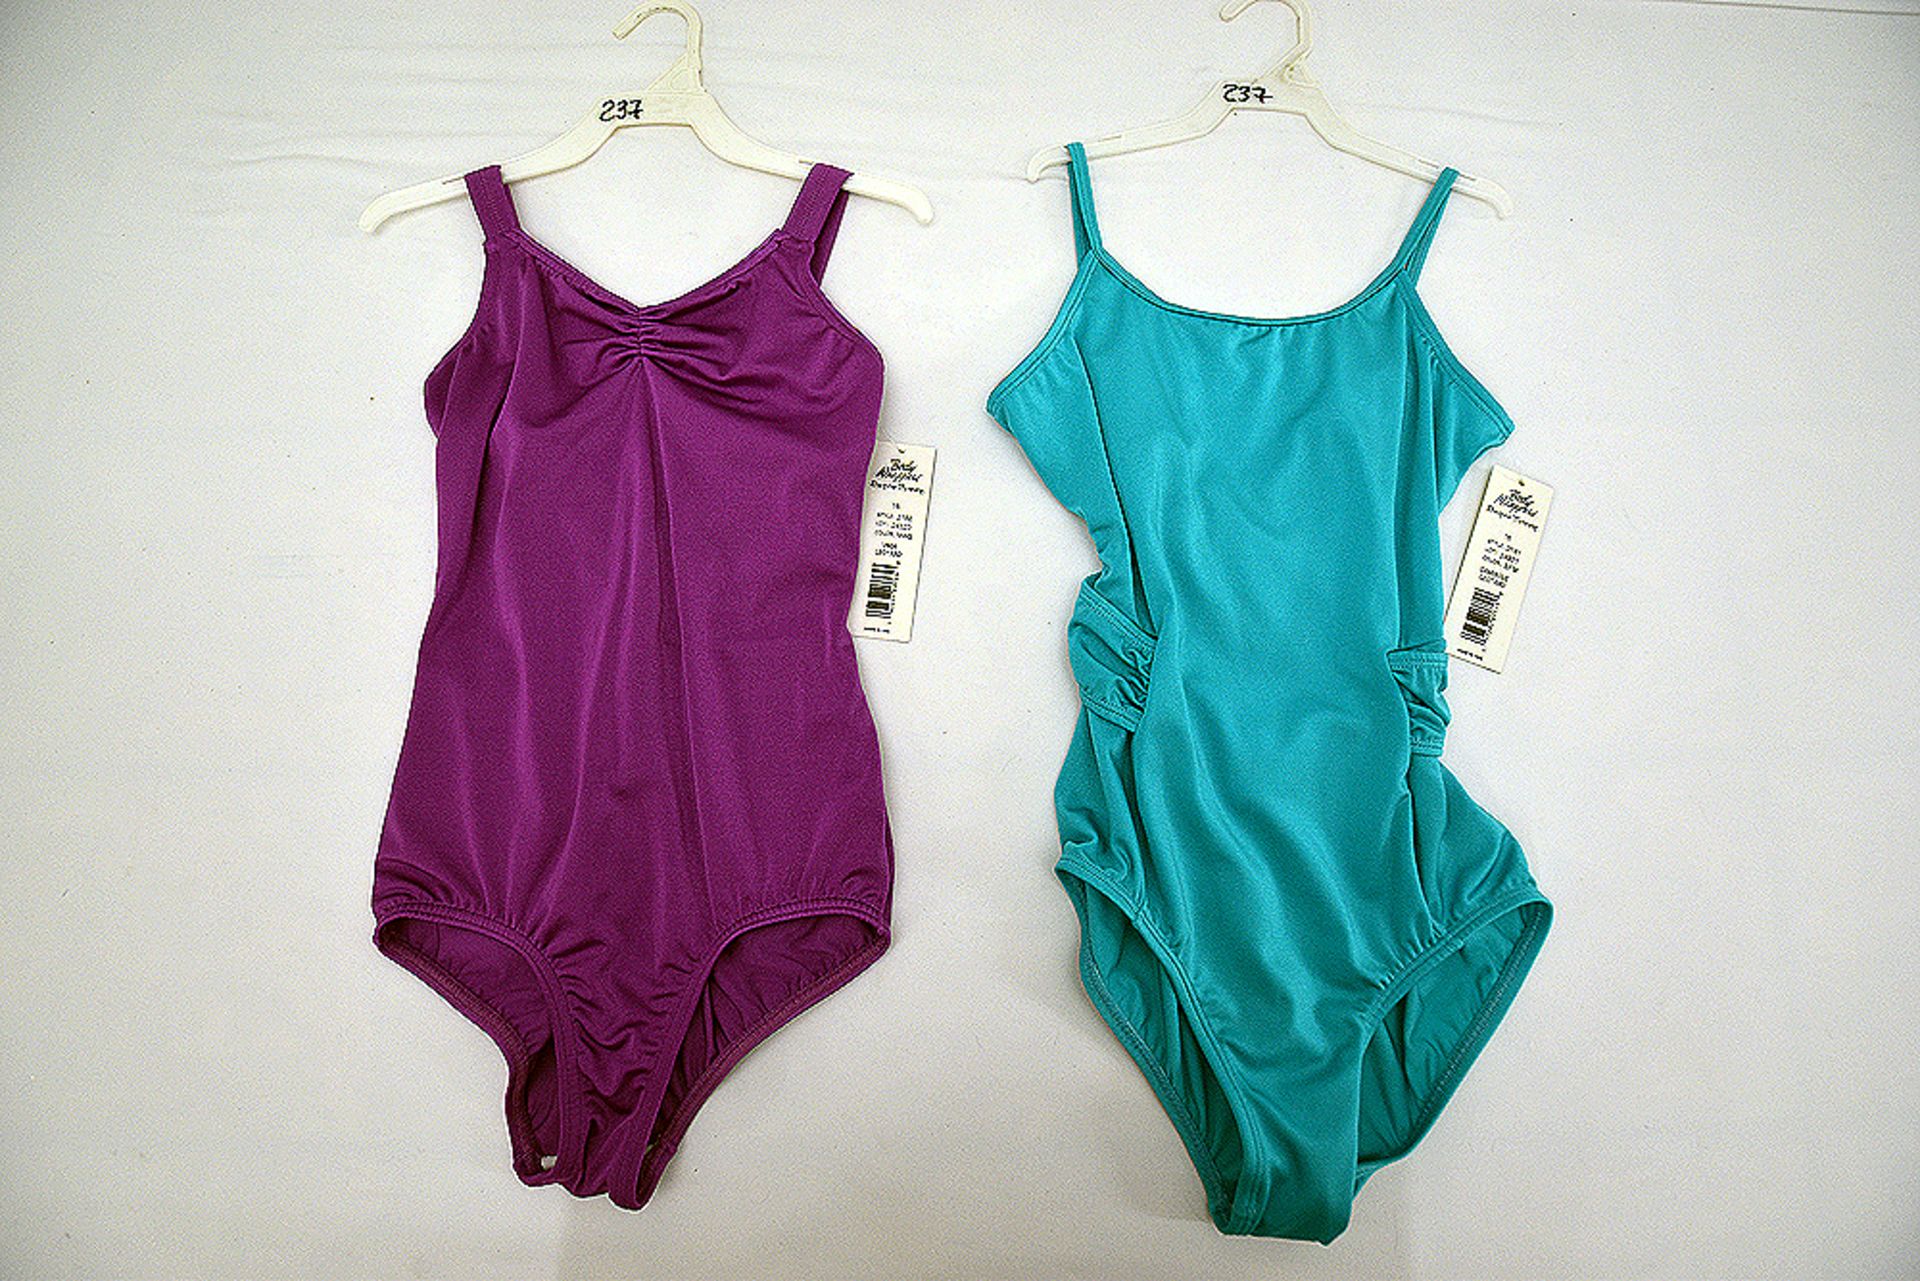 Ass't Size Tank and Camisole Leotards (MSRP $25) - Image 4 of 8